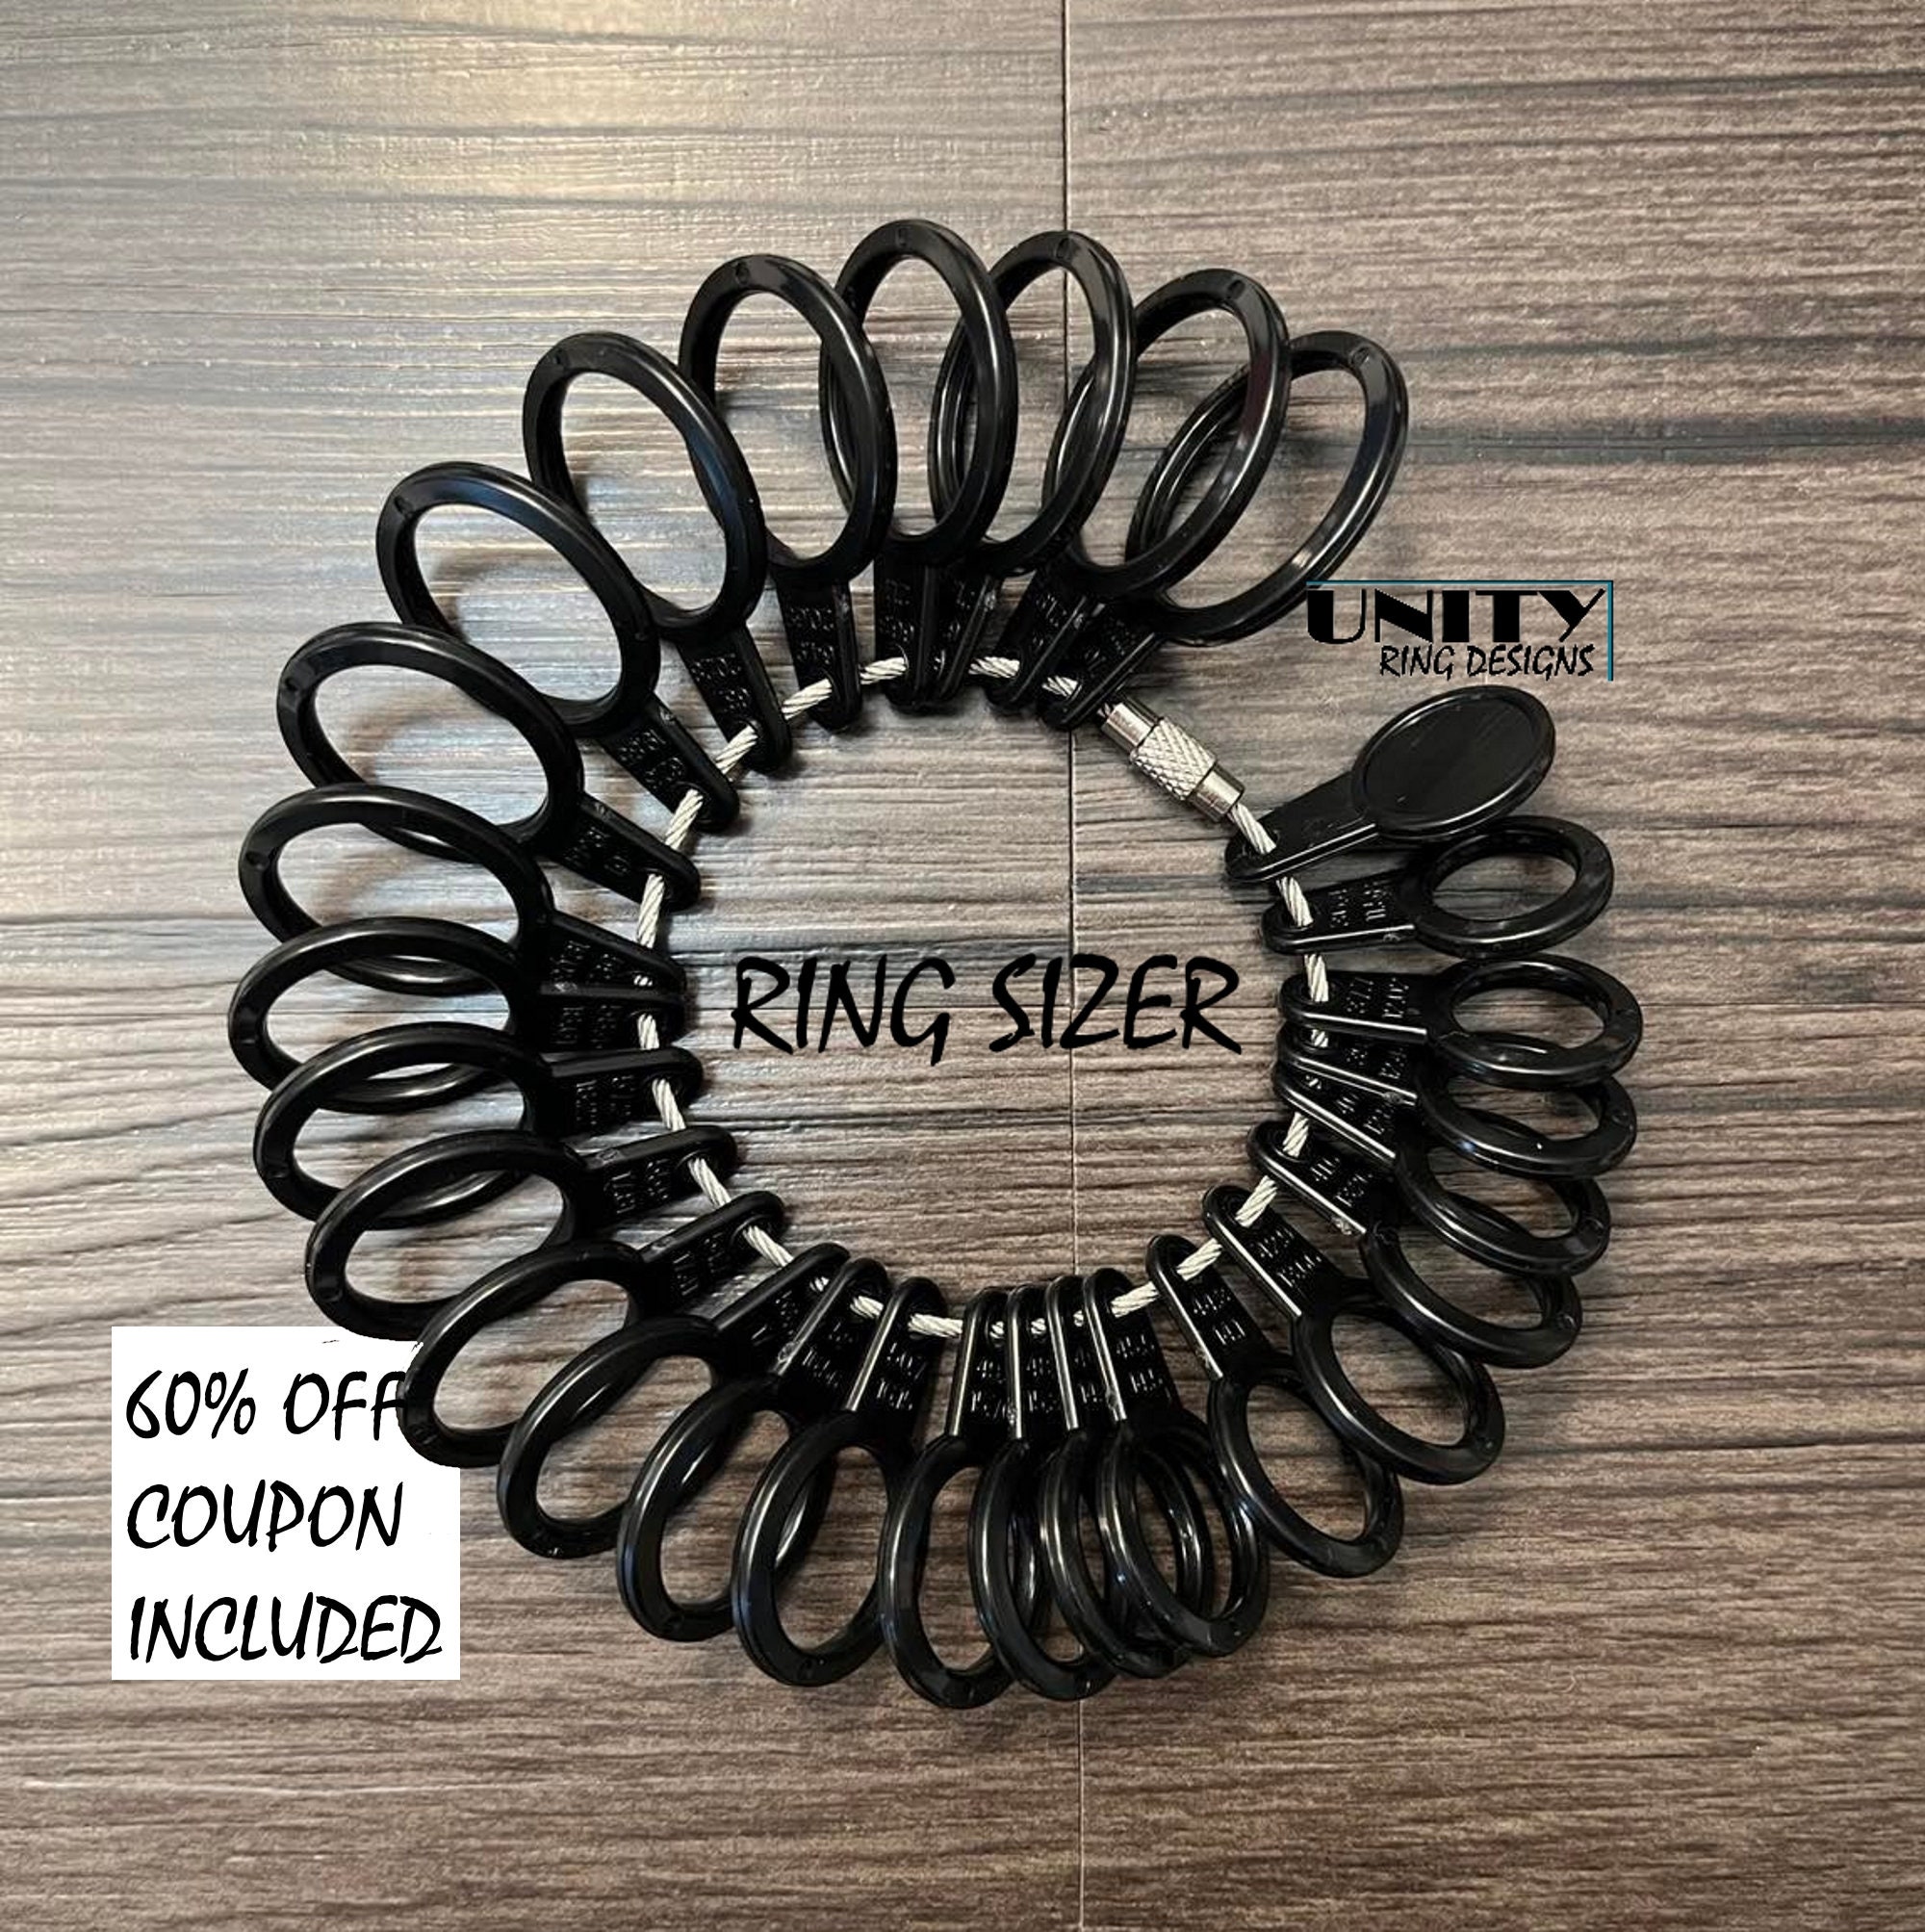 Ring Sizer, Find Ring Size, Adjustable Ring Sizer, Ring Sizer Adjuster,  Measure Ring Size at Home 